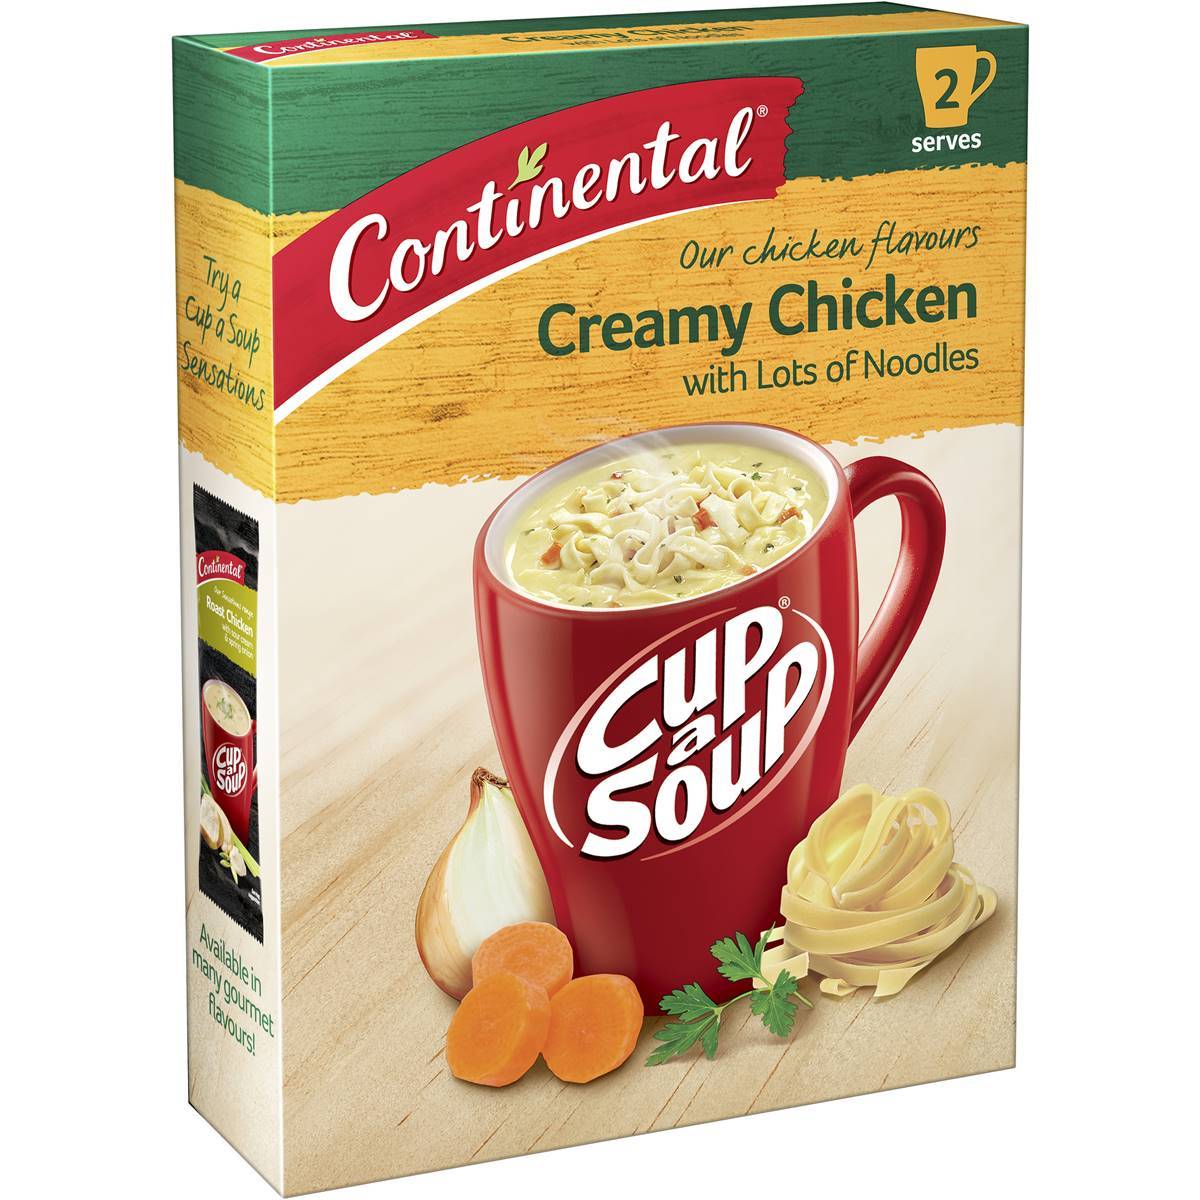 Continental Cup a Soup Creamy Chicken with Lots of Noodles